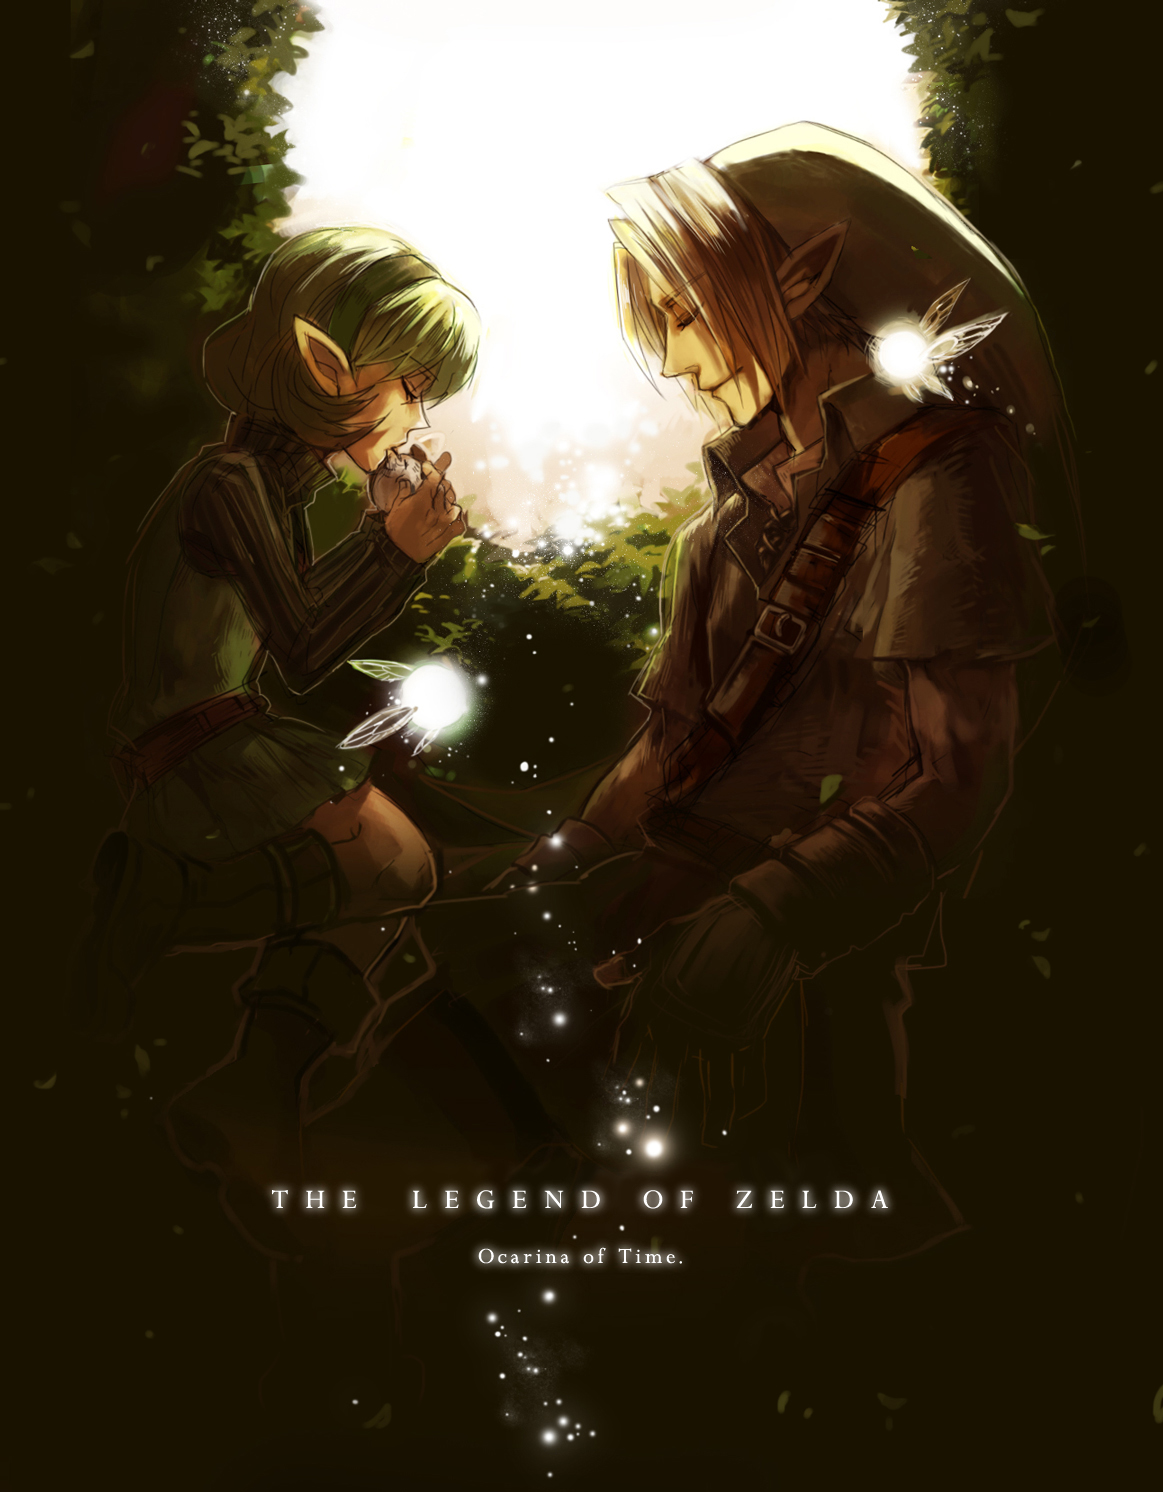 Link & Saria ~ The Legend of Zelda Orcarina of Time